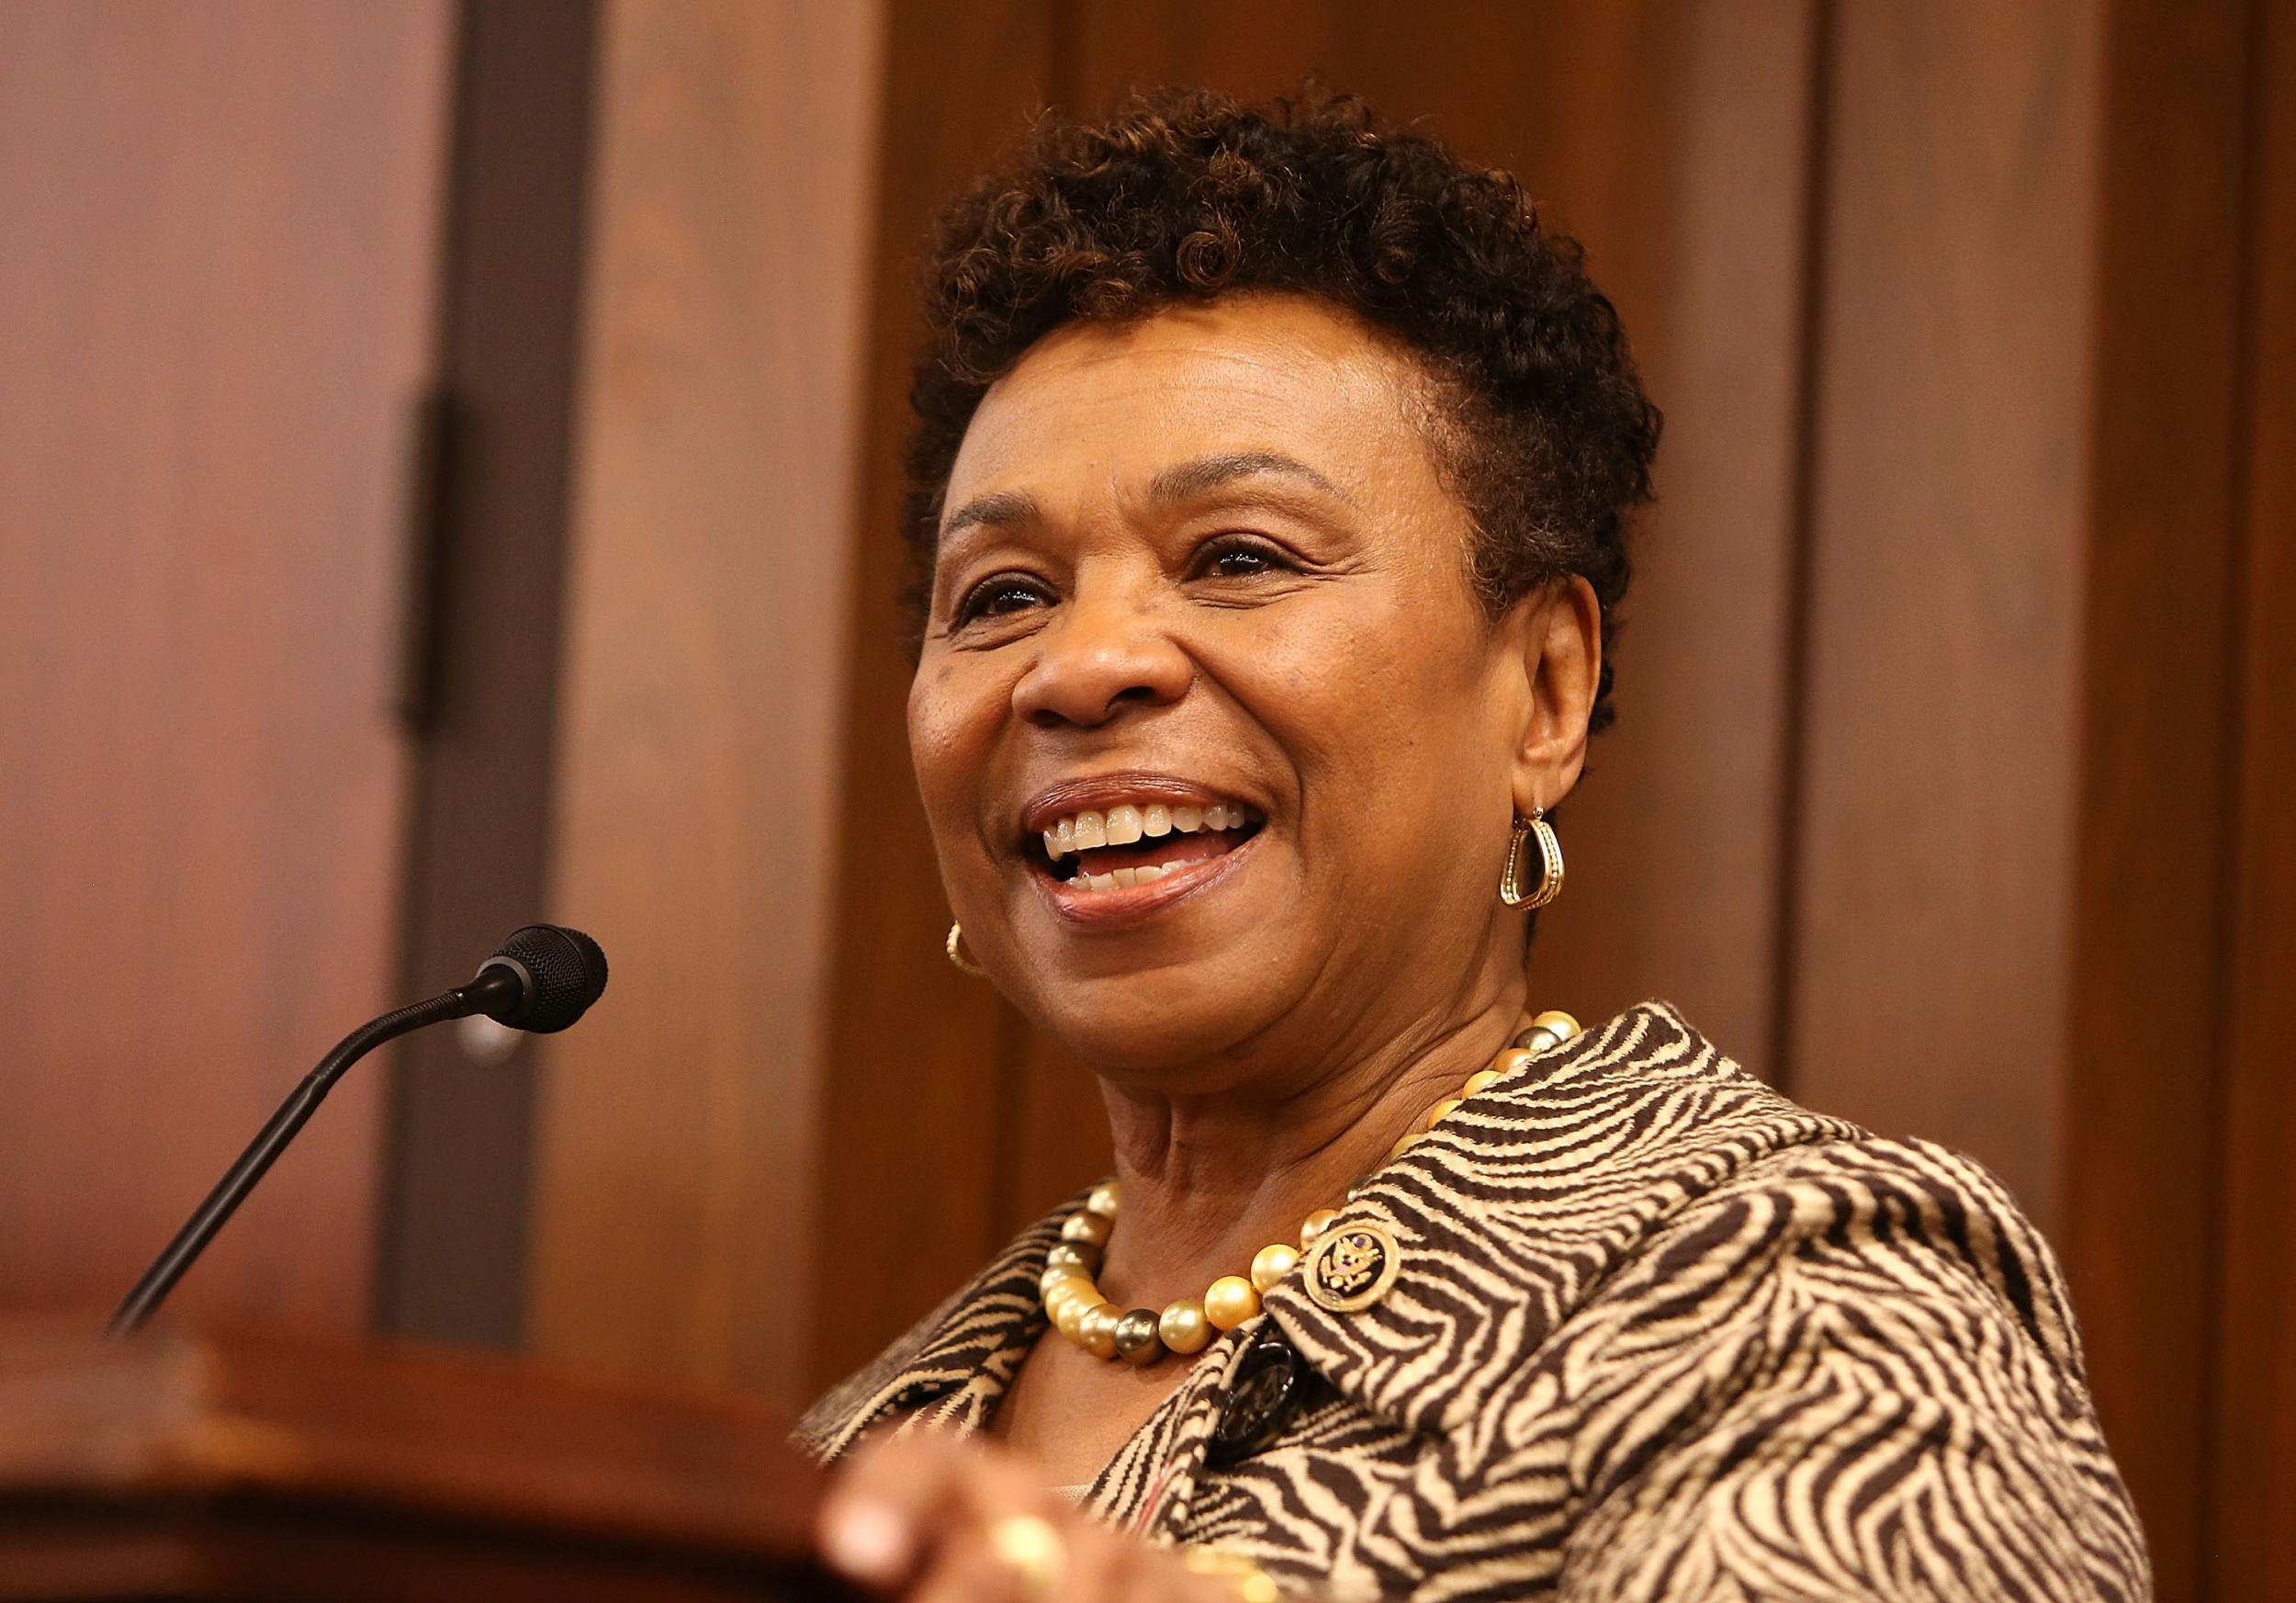 Representative Barbara Lee has introduced a bill to reduce the president's ability to wage war